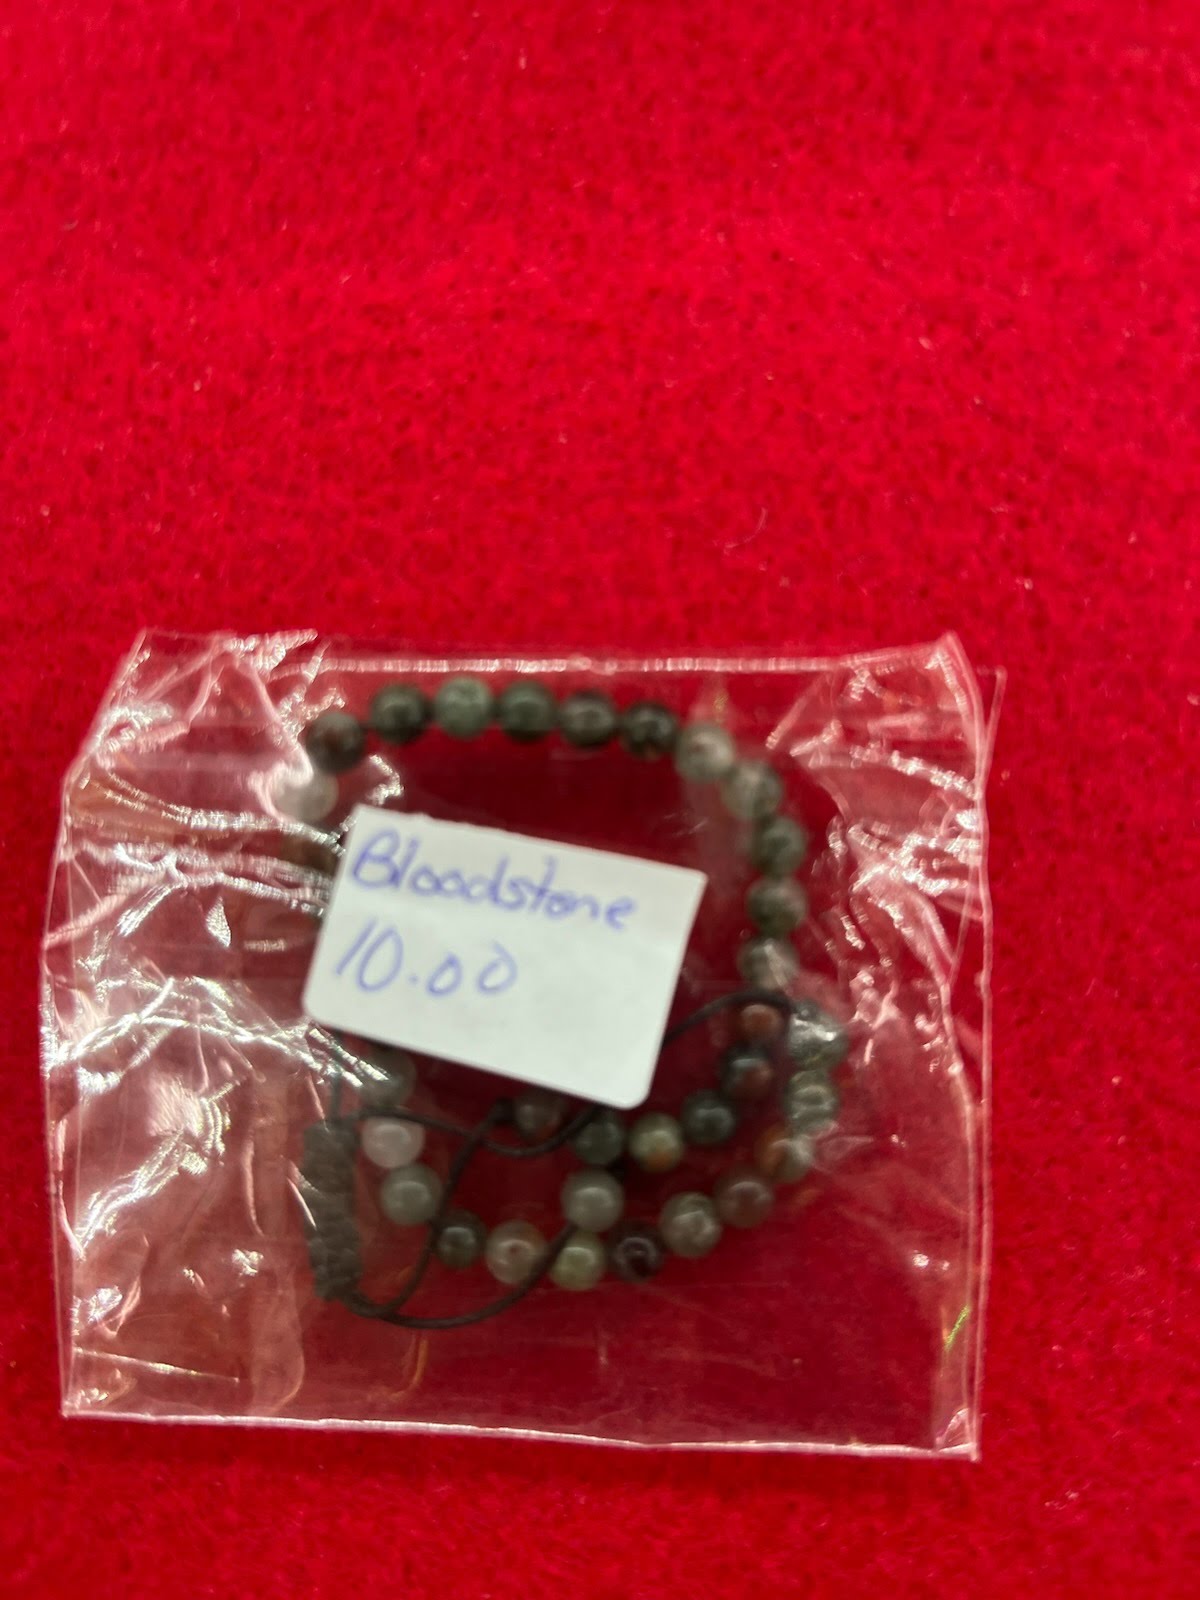 A bag of beads with a tag on it